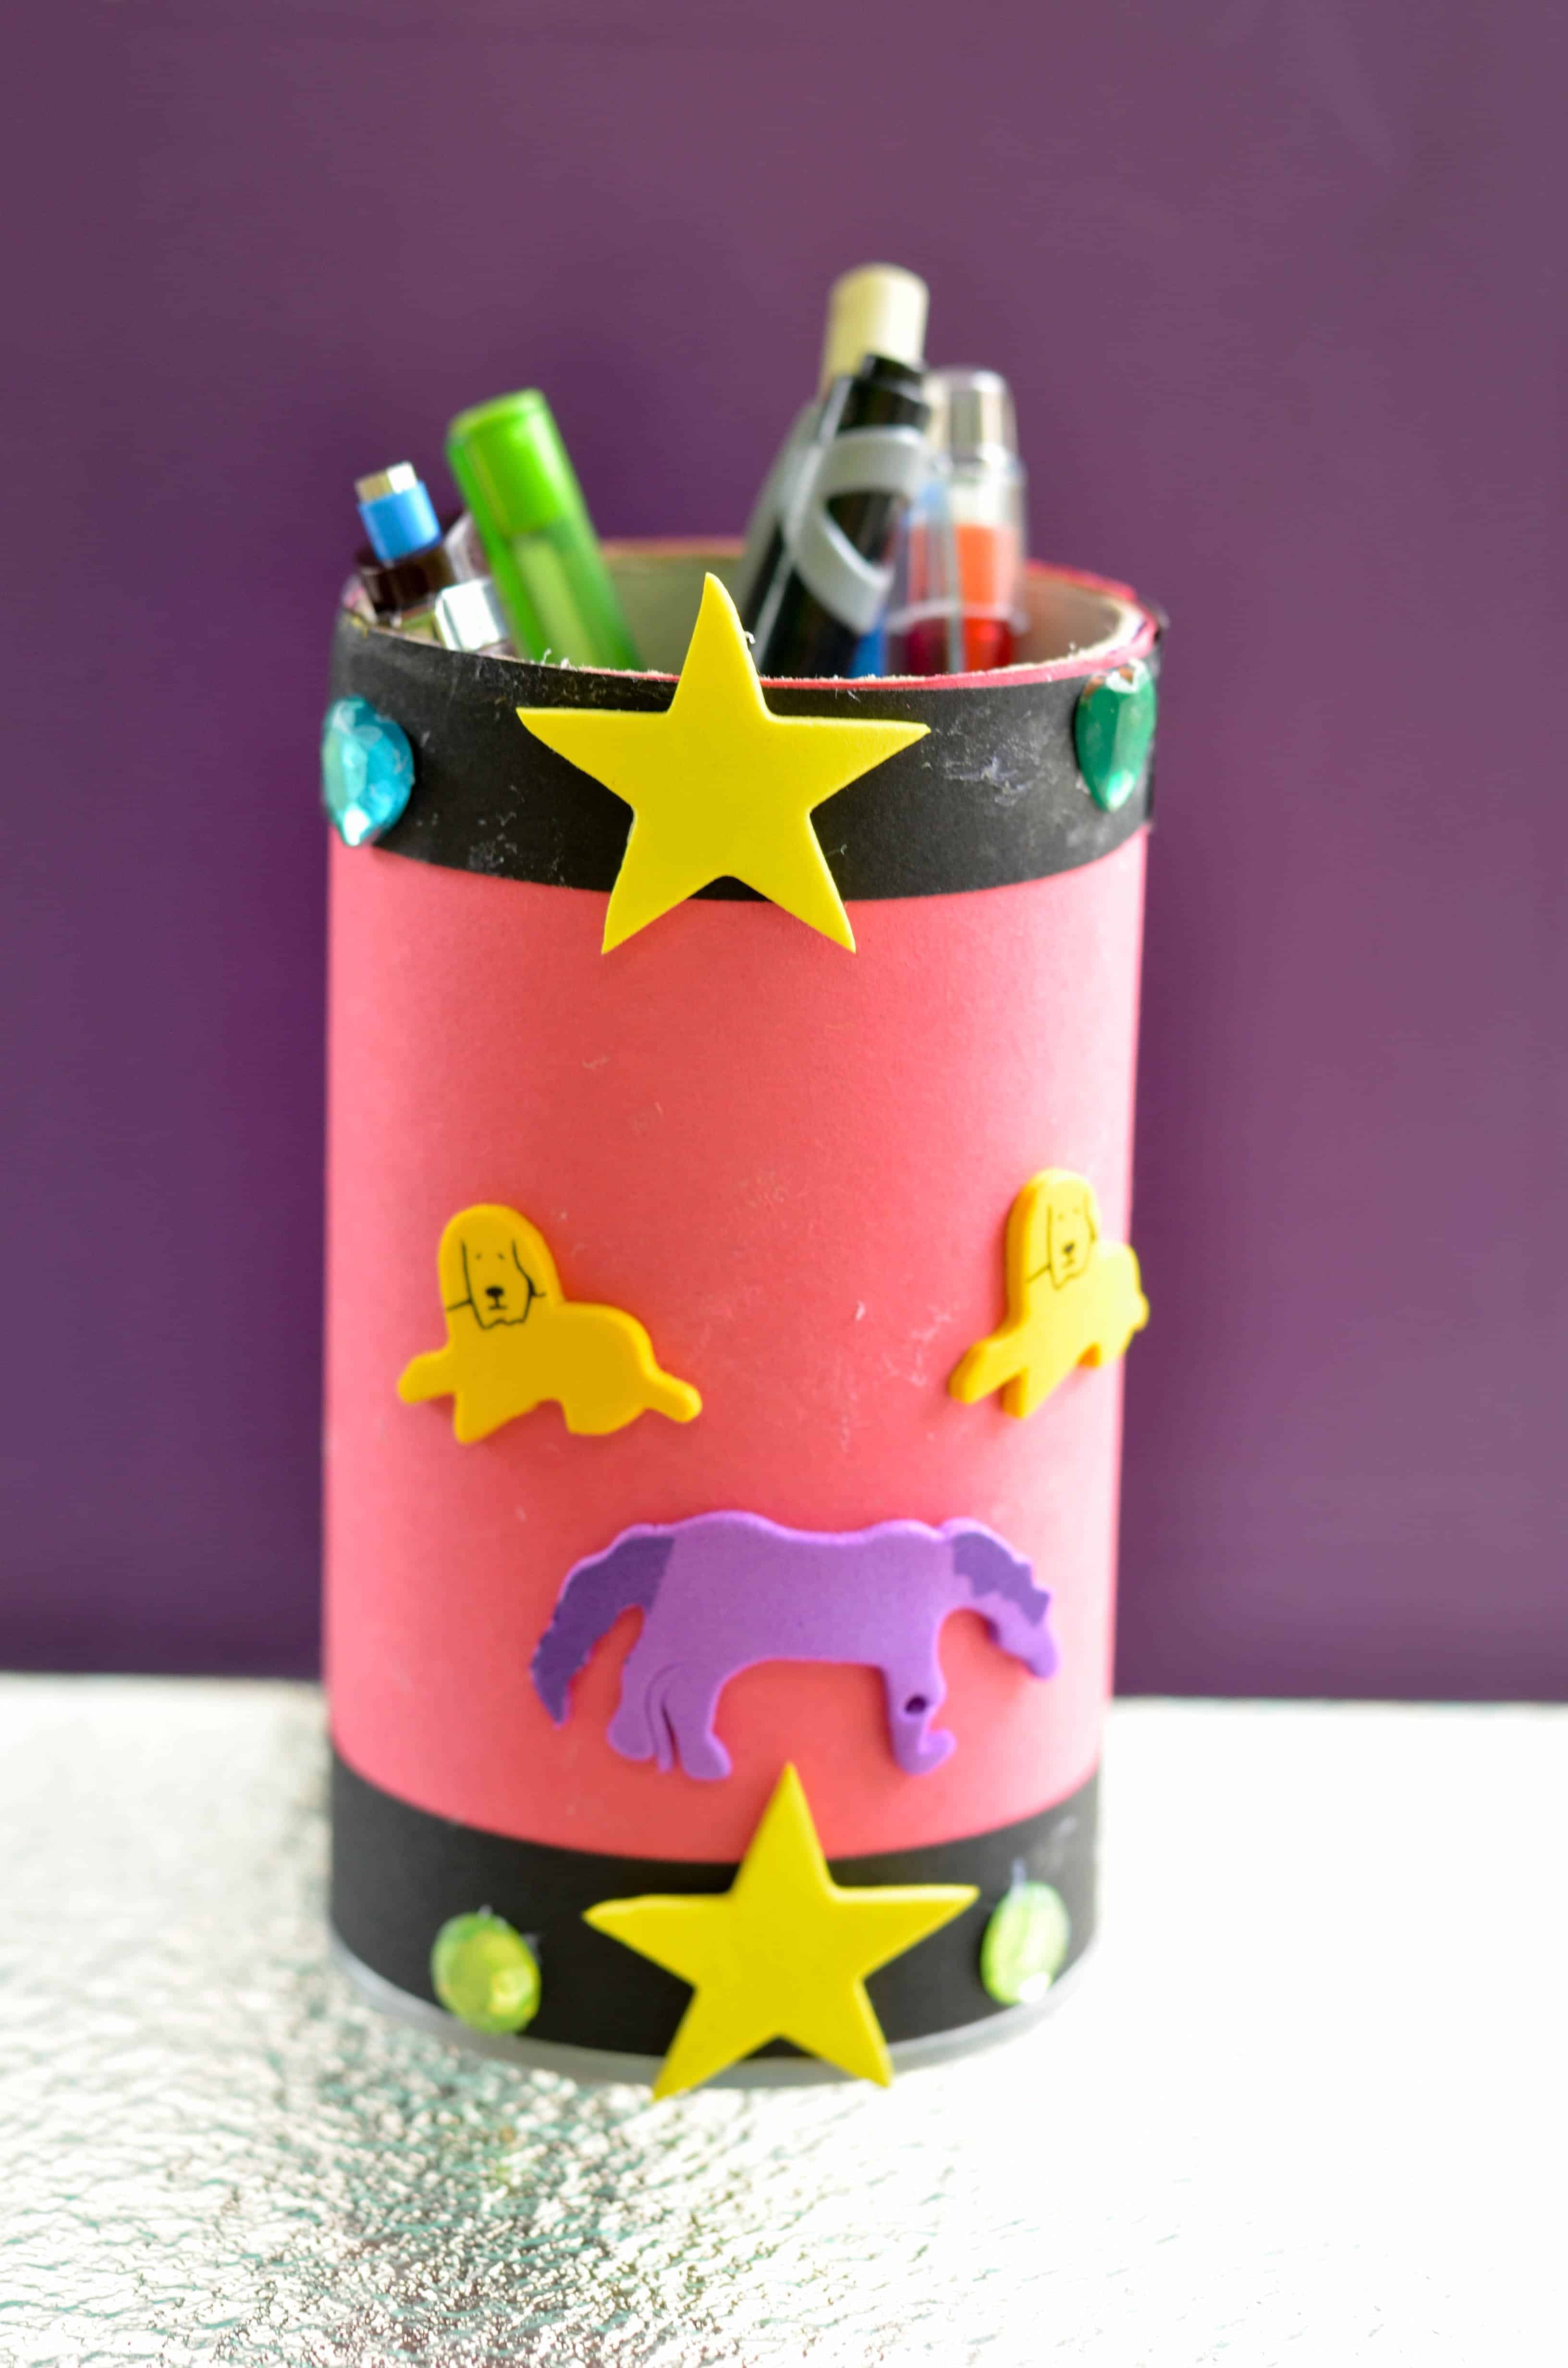 Prepare your child for back to school with this simple pencil and art supplies cup. This craft will come together quick and easy with basic supplies!